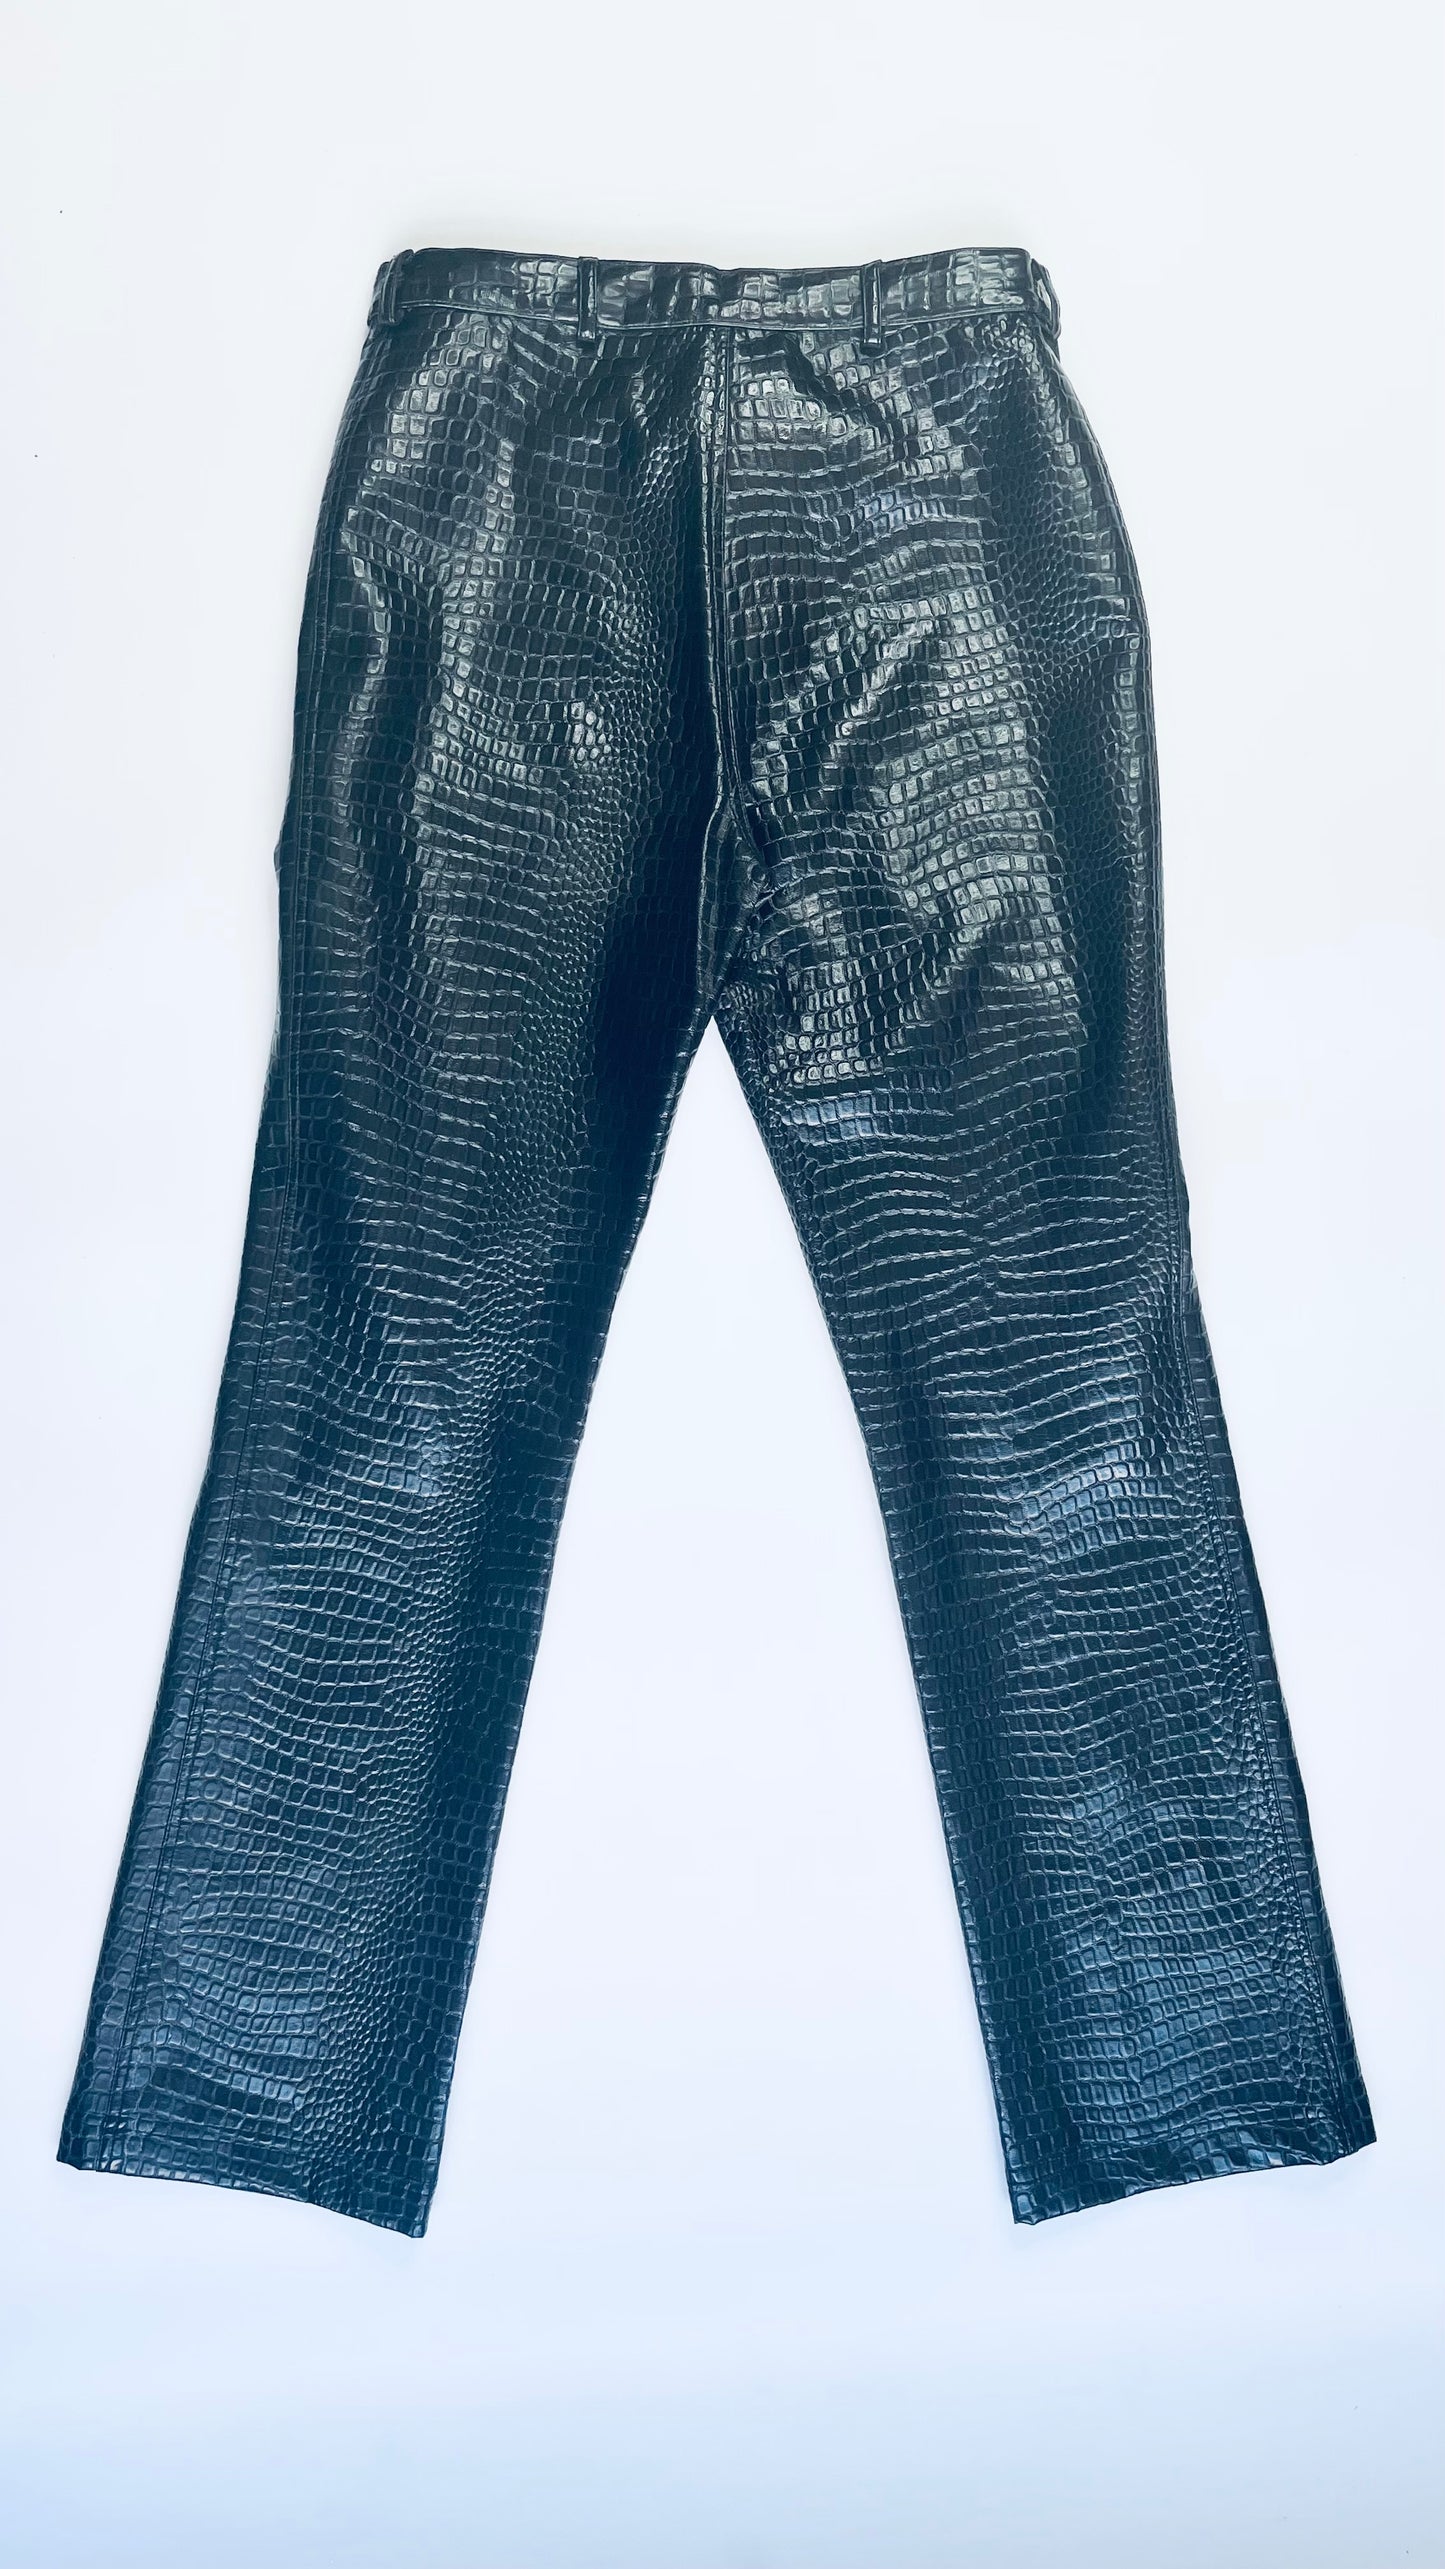 90s Moschino black crocodile embossed faux leather pants - Size 8